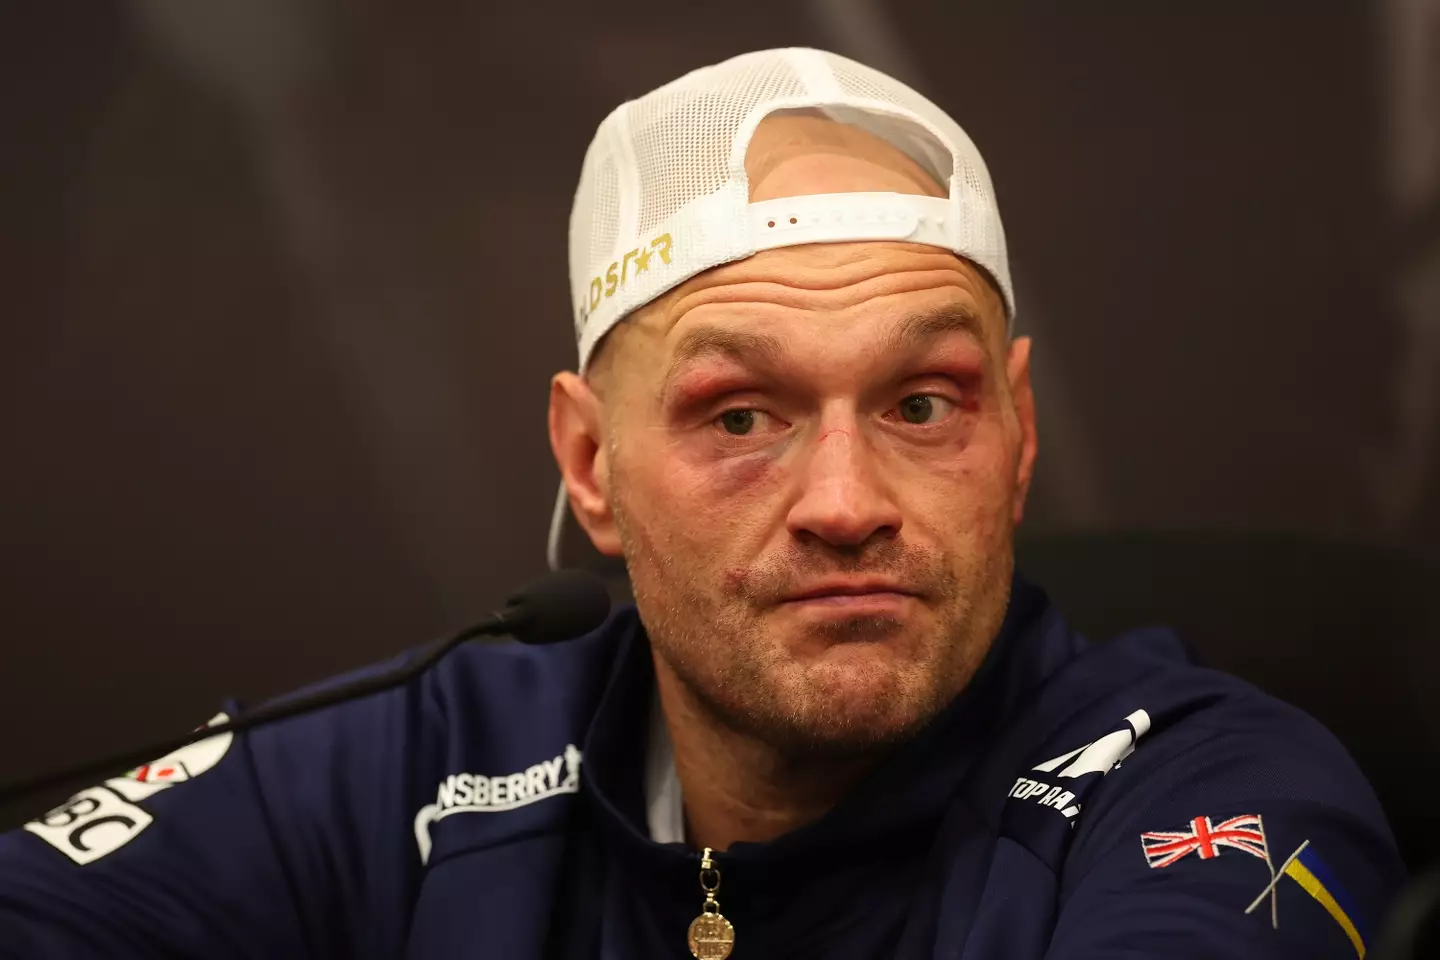 Tyson Fury after his first defeat. (